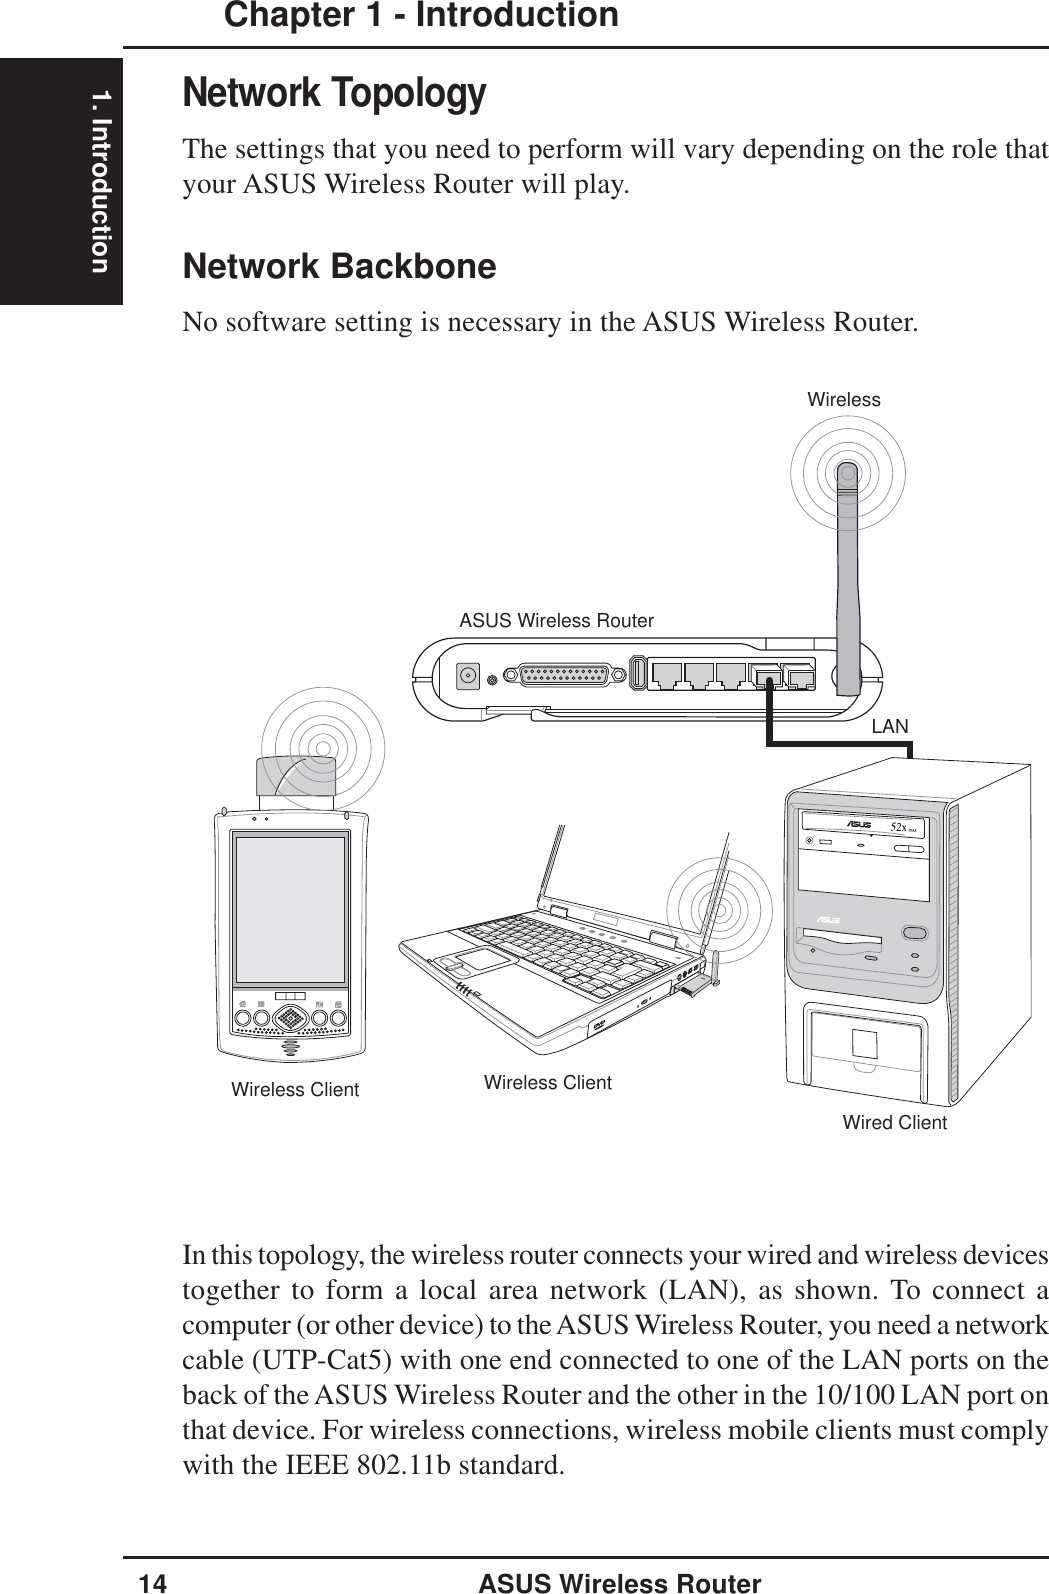 1. IntroductionChapter 1 - Introduction14 ASUS Wireless RouterWireless ClientWireless ClientASUS Wireless RouterLANWirelessWired ClientNetwork TopologyThe settings that you need to perform will vary depending on the role thatyour ASUS Wireless Router will play.Network BackboneNo software setting is necessary in the ASUS Wireless Router.In this topology, the wireless router connects your wired and wireless devicestogether to form a local area network (LAN), as shown. To connect acomputer (or other device) to the ASUS Wireless Router, you need a networkcable (UTP-Cat5) with one end connected to one of the LAN ports on theback of the ASUS Wireless Router and the other in the 10/100 LAN port onthat device. For wireless connections, wireless mobile clients must complywith the IEEE 802.11b standard.